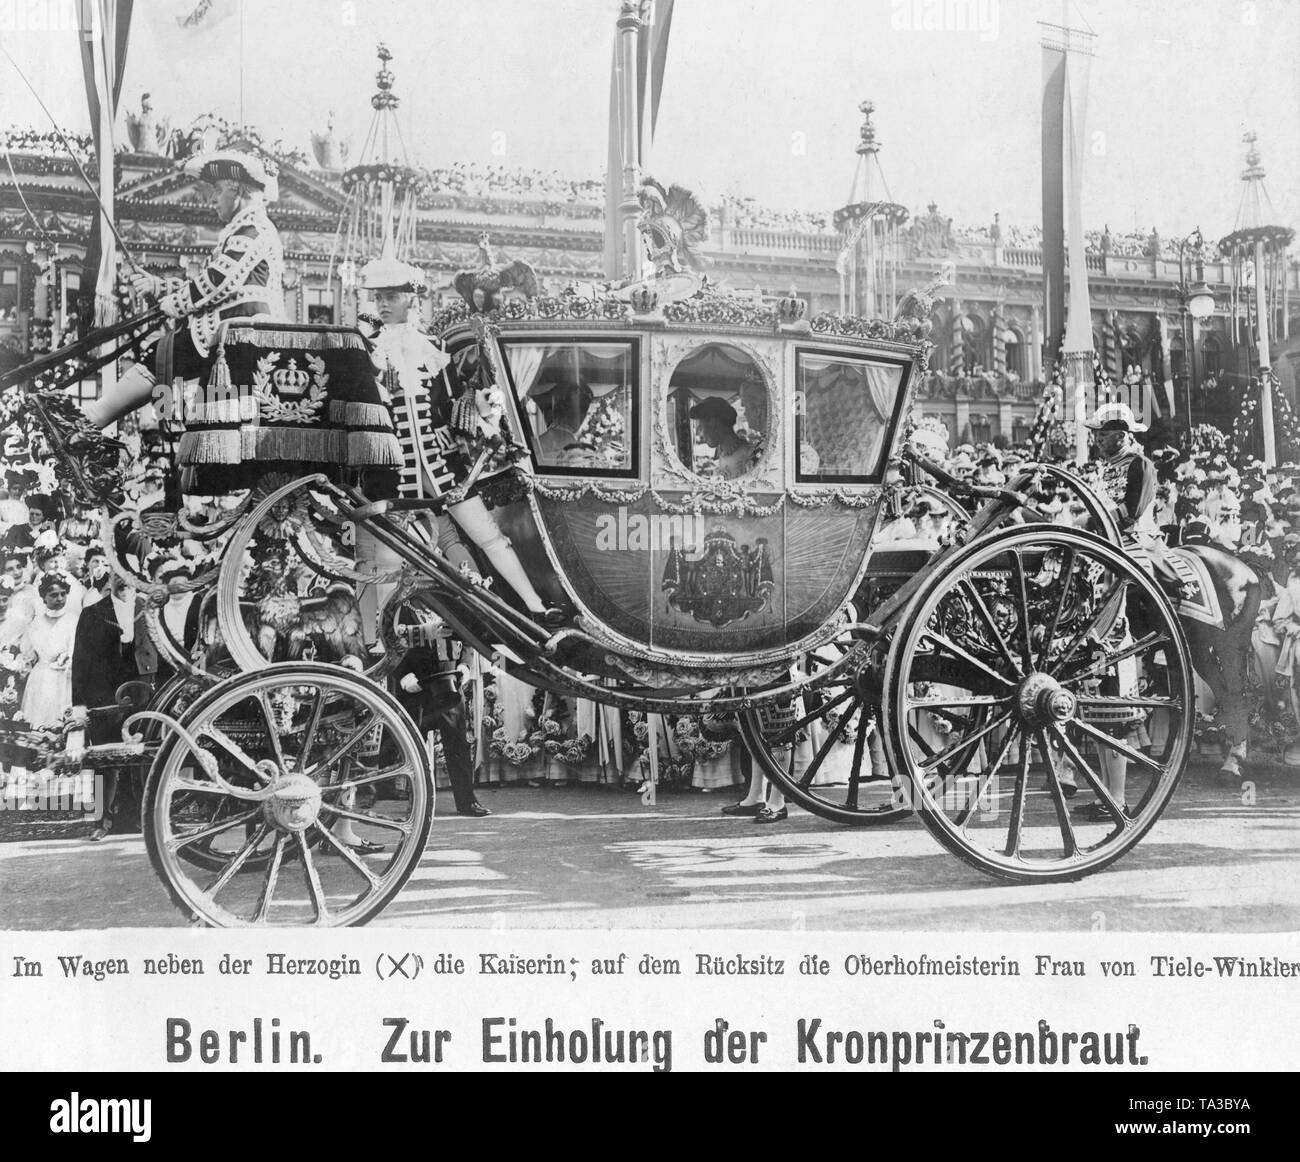 Crown Princess Cecilie (right behind) drives through Berlin together with her mother-in-law (right front), Empress Auguste Viktoria of Prussia, and the Mistress of the Robes Ms von Tiele-Winkler (left). Here she listens the speech of the Berlin Mayor Kirschner on the Pariser Platz from the carriage. Stock Photo